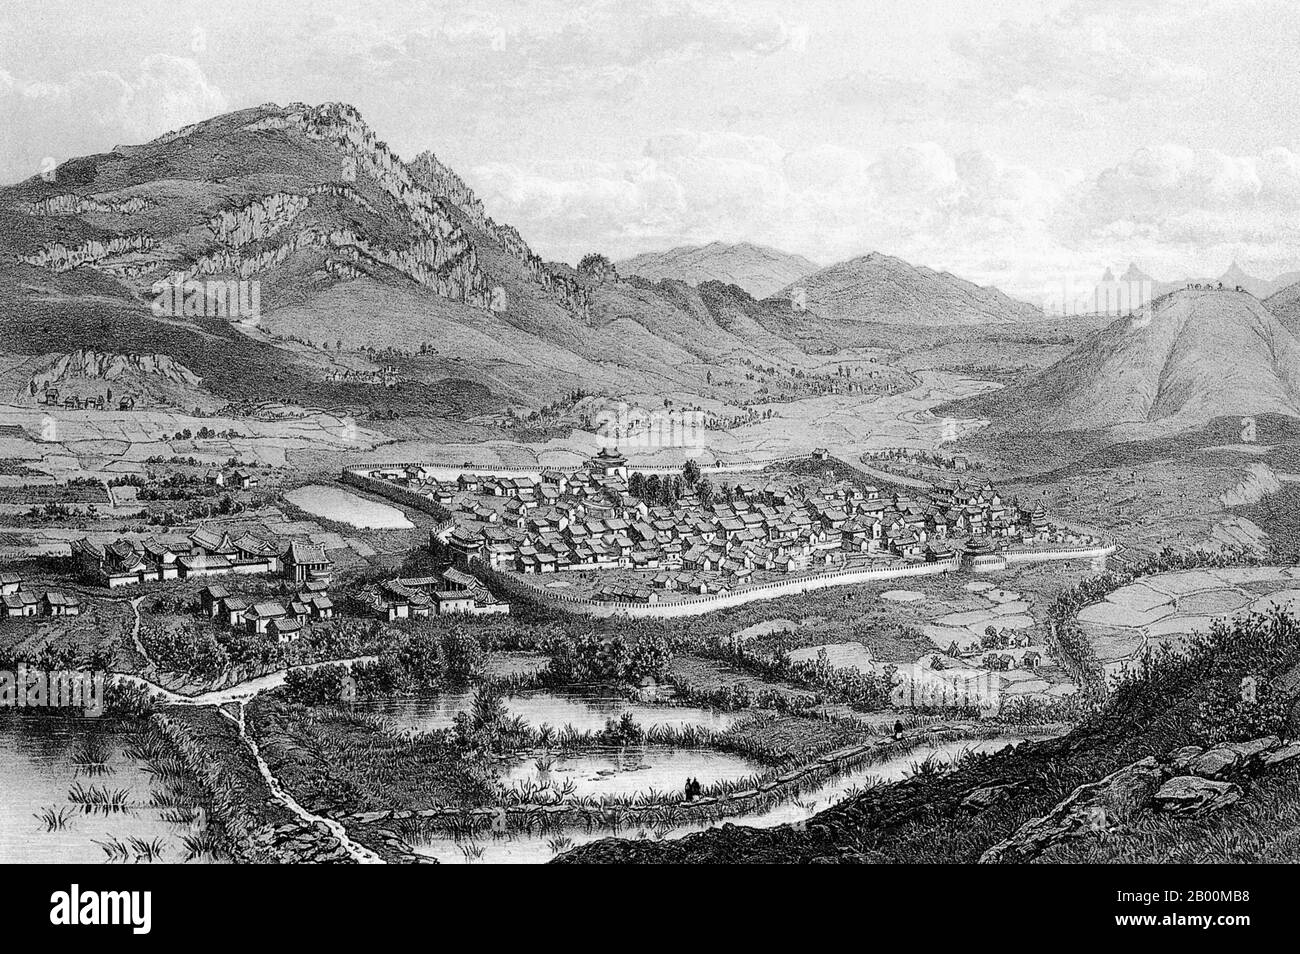 China: The walled city of Pu'er (now Simao) in southern Yunnan c. 1868.  The Tea Horse Road (Cha Ma Dao) was a network of mule caravan paths winding through the mountains of Yunnan, Sichuan and Tibet in Southwest China.  It is also sometimes referred to as the Southern Silk Road and Ancient Tea and Horse Road. From around a thousand years ago, the Ancient Tea Route was a trade link from Yunnan, one of the first tea-producing regions, to India via Burma, to Tibet, and to central China via Sichuan Province. In addition to tea, the mule caravans carried salt. Stock Photo